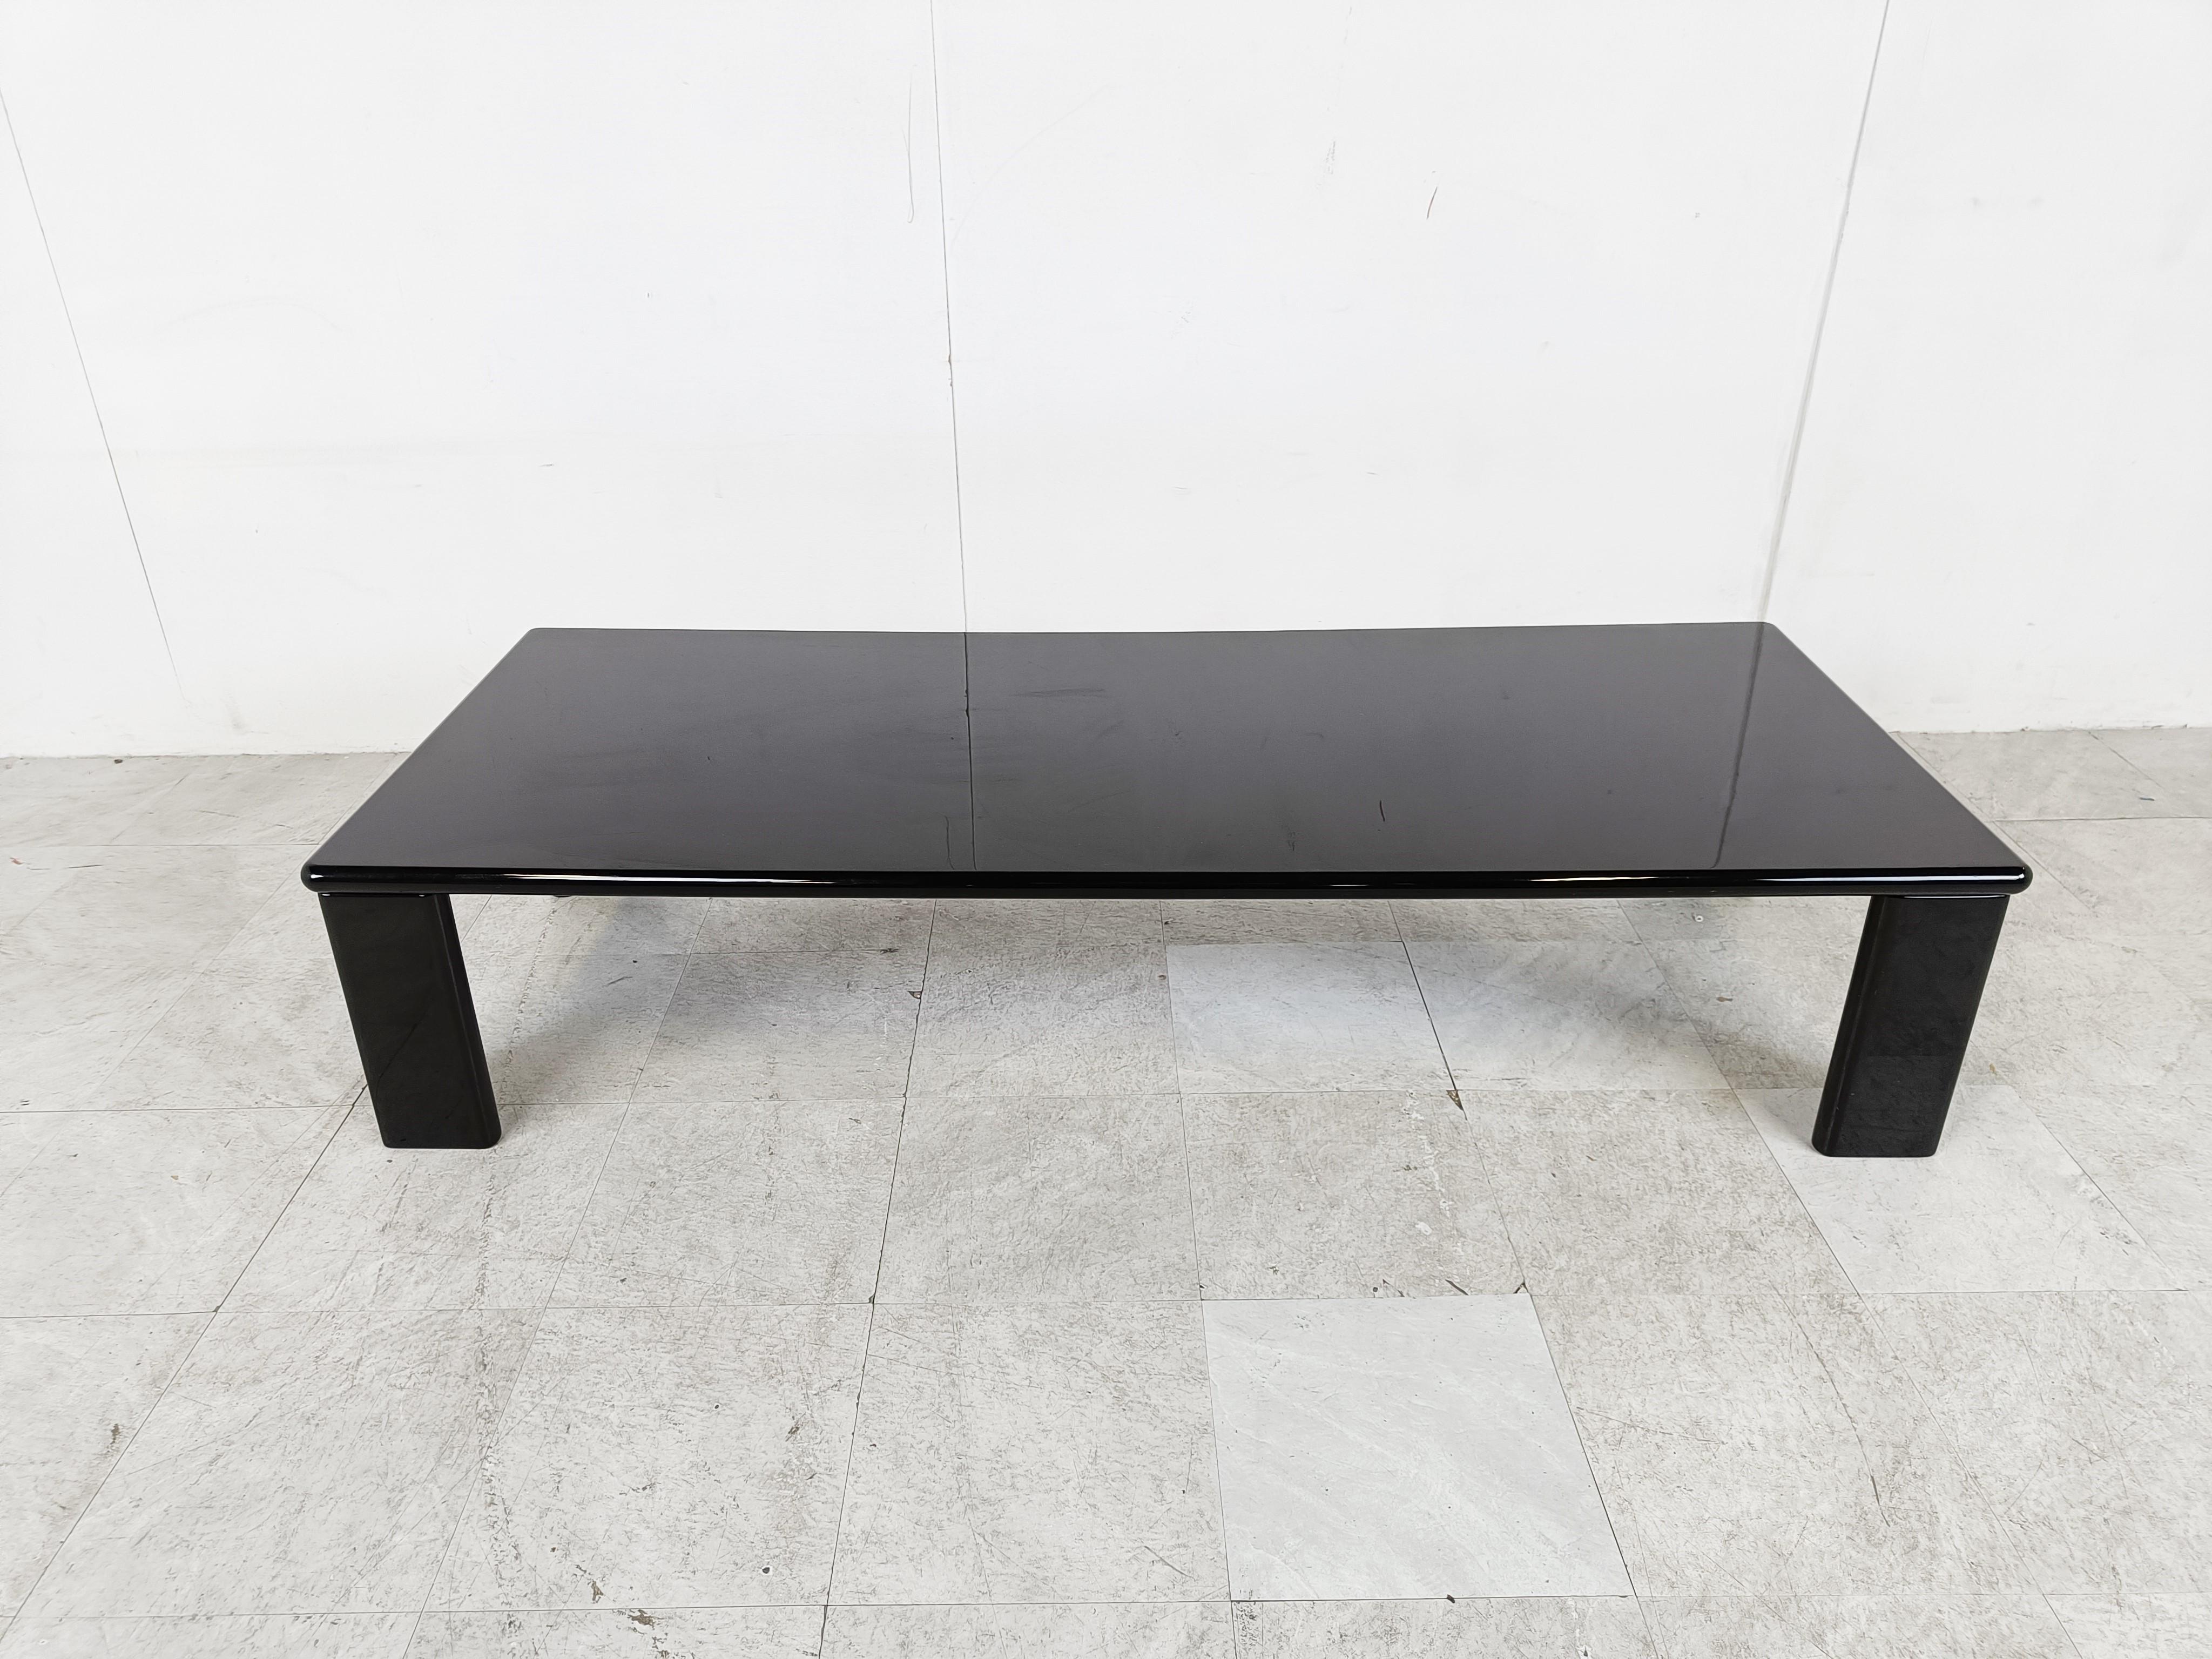 Black lacquered coffee table model 'Ming' designed by Kazuhide Takahama and produced by Studio Simon.

This very large coffee table is very simply designed yet looks beautiful.

Very good overall condition

1970s - Italy

Height: